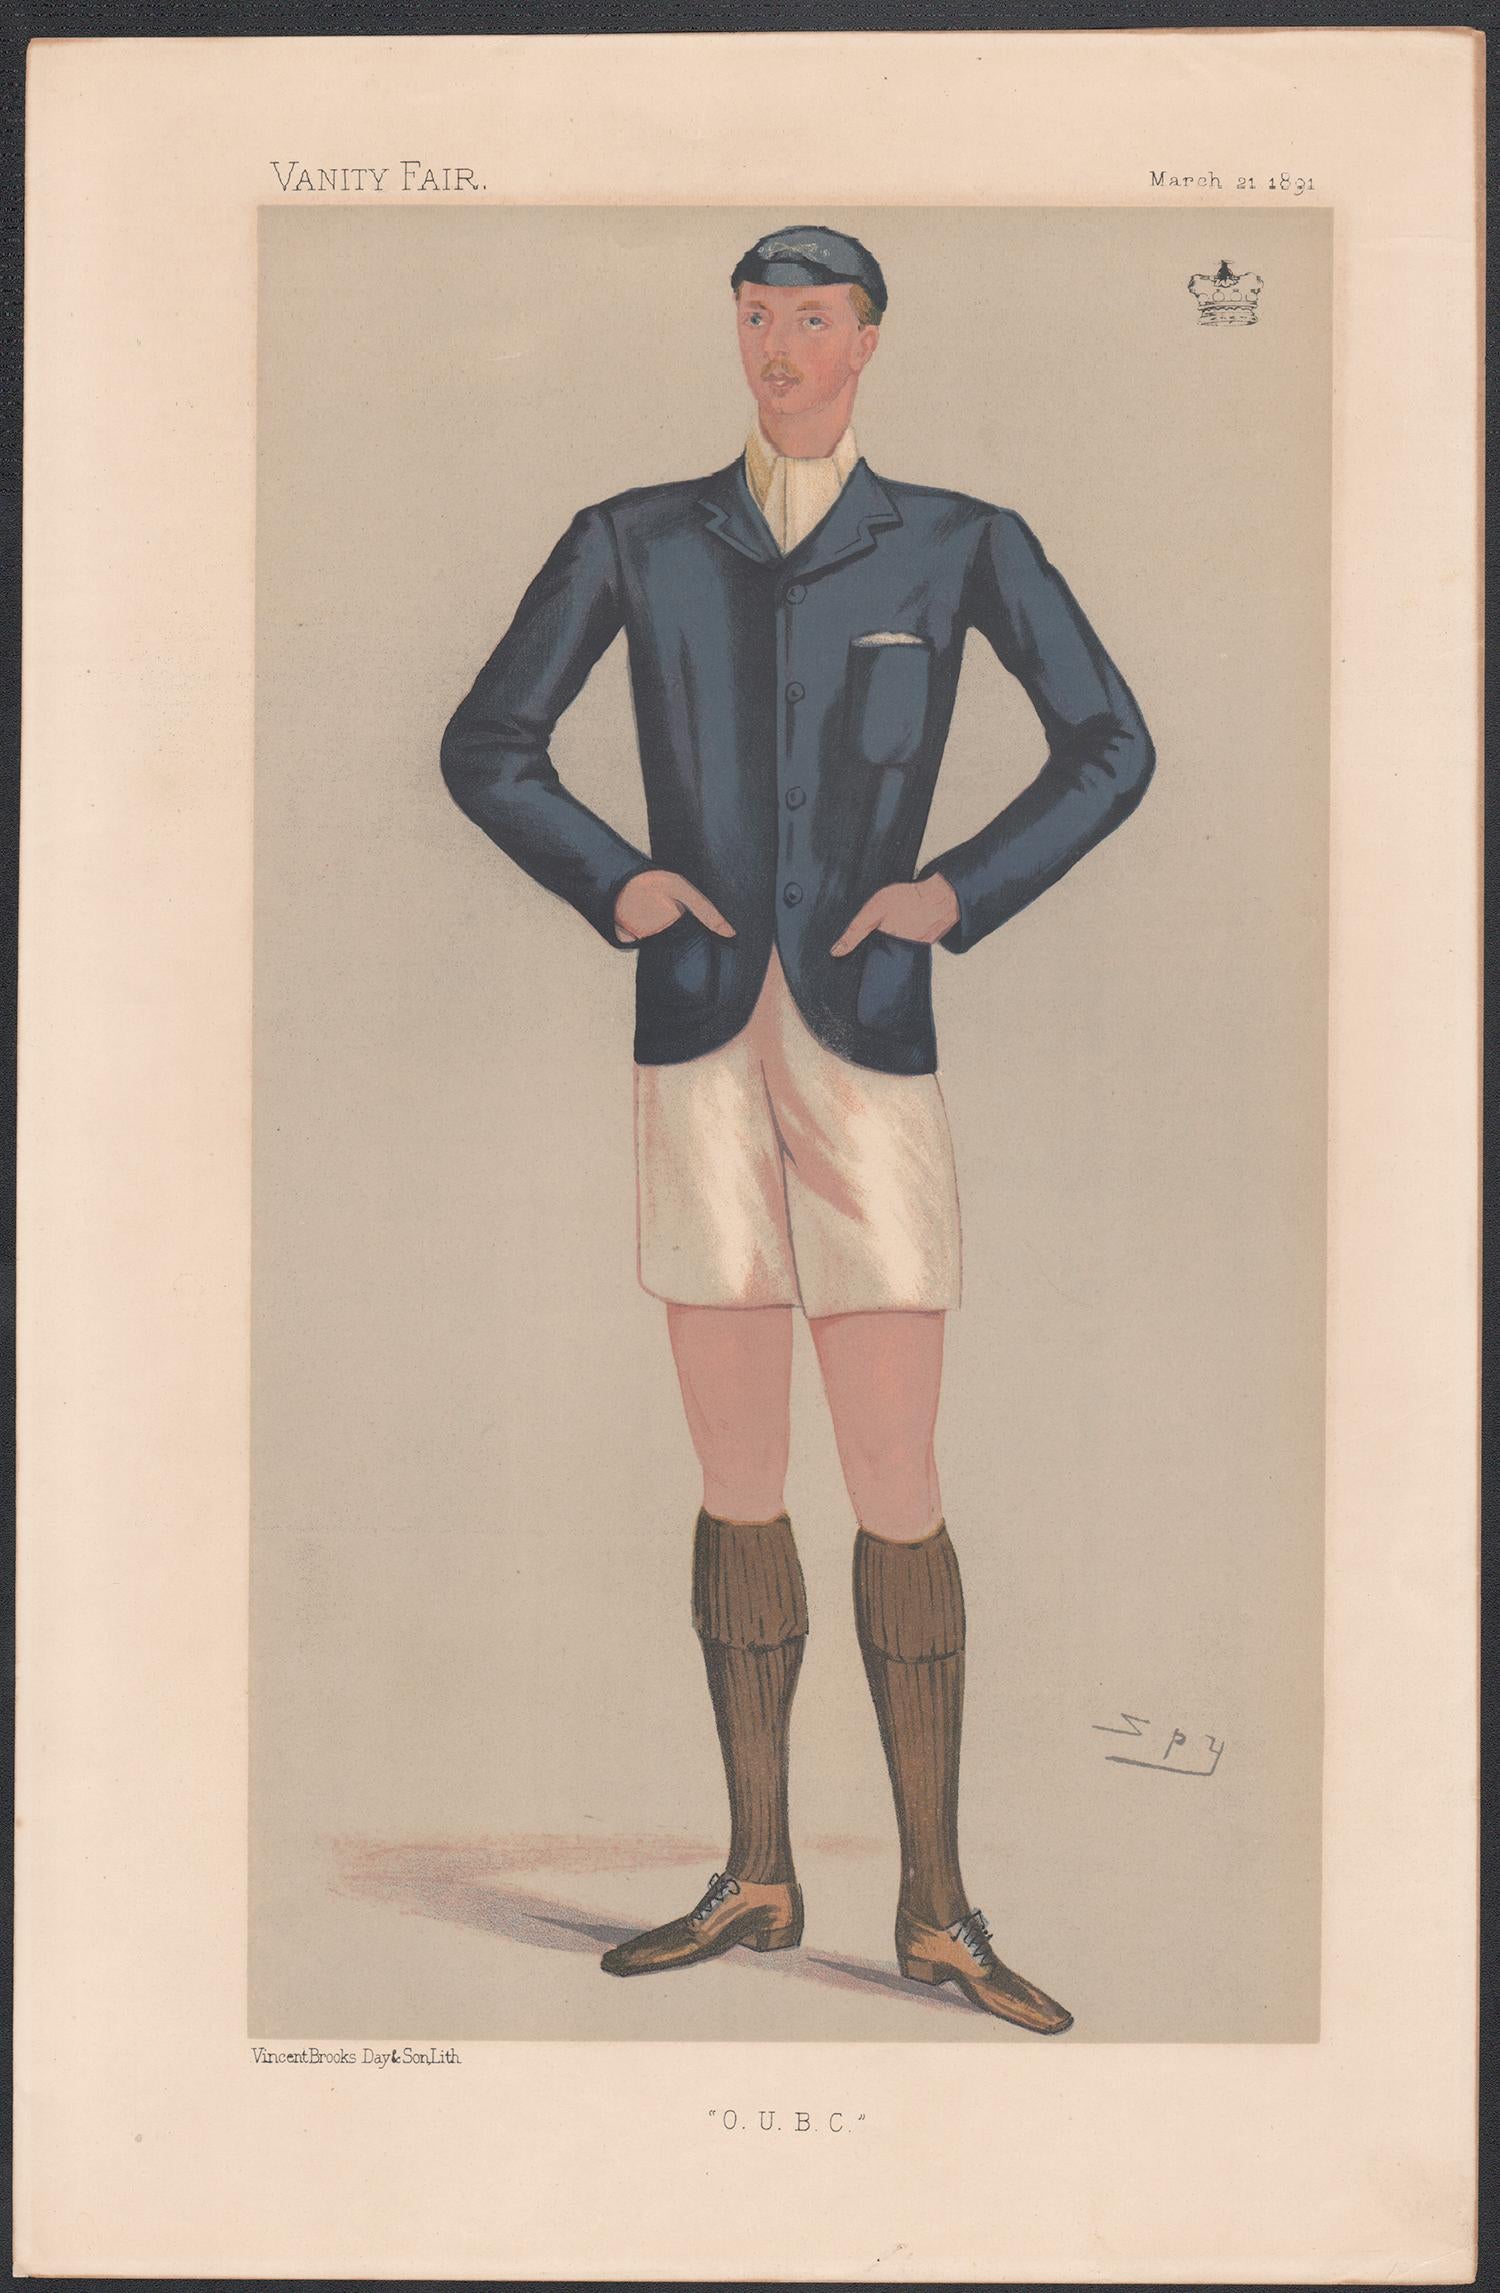 Lord Ampthill, rower, Vanity Fair rowing portrait chromolithograph, 1891 - Print by Sir Leslie Ward